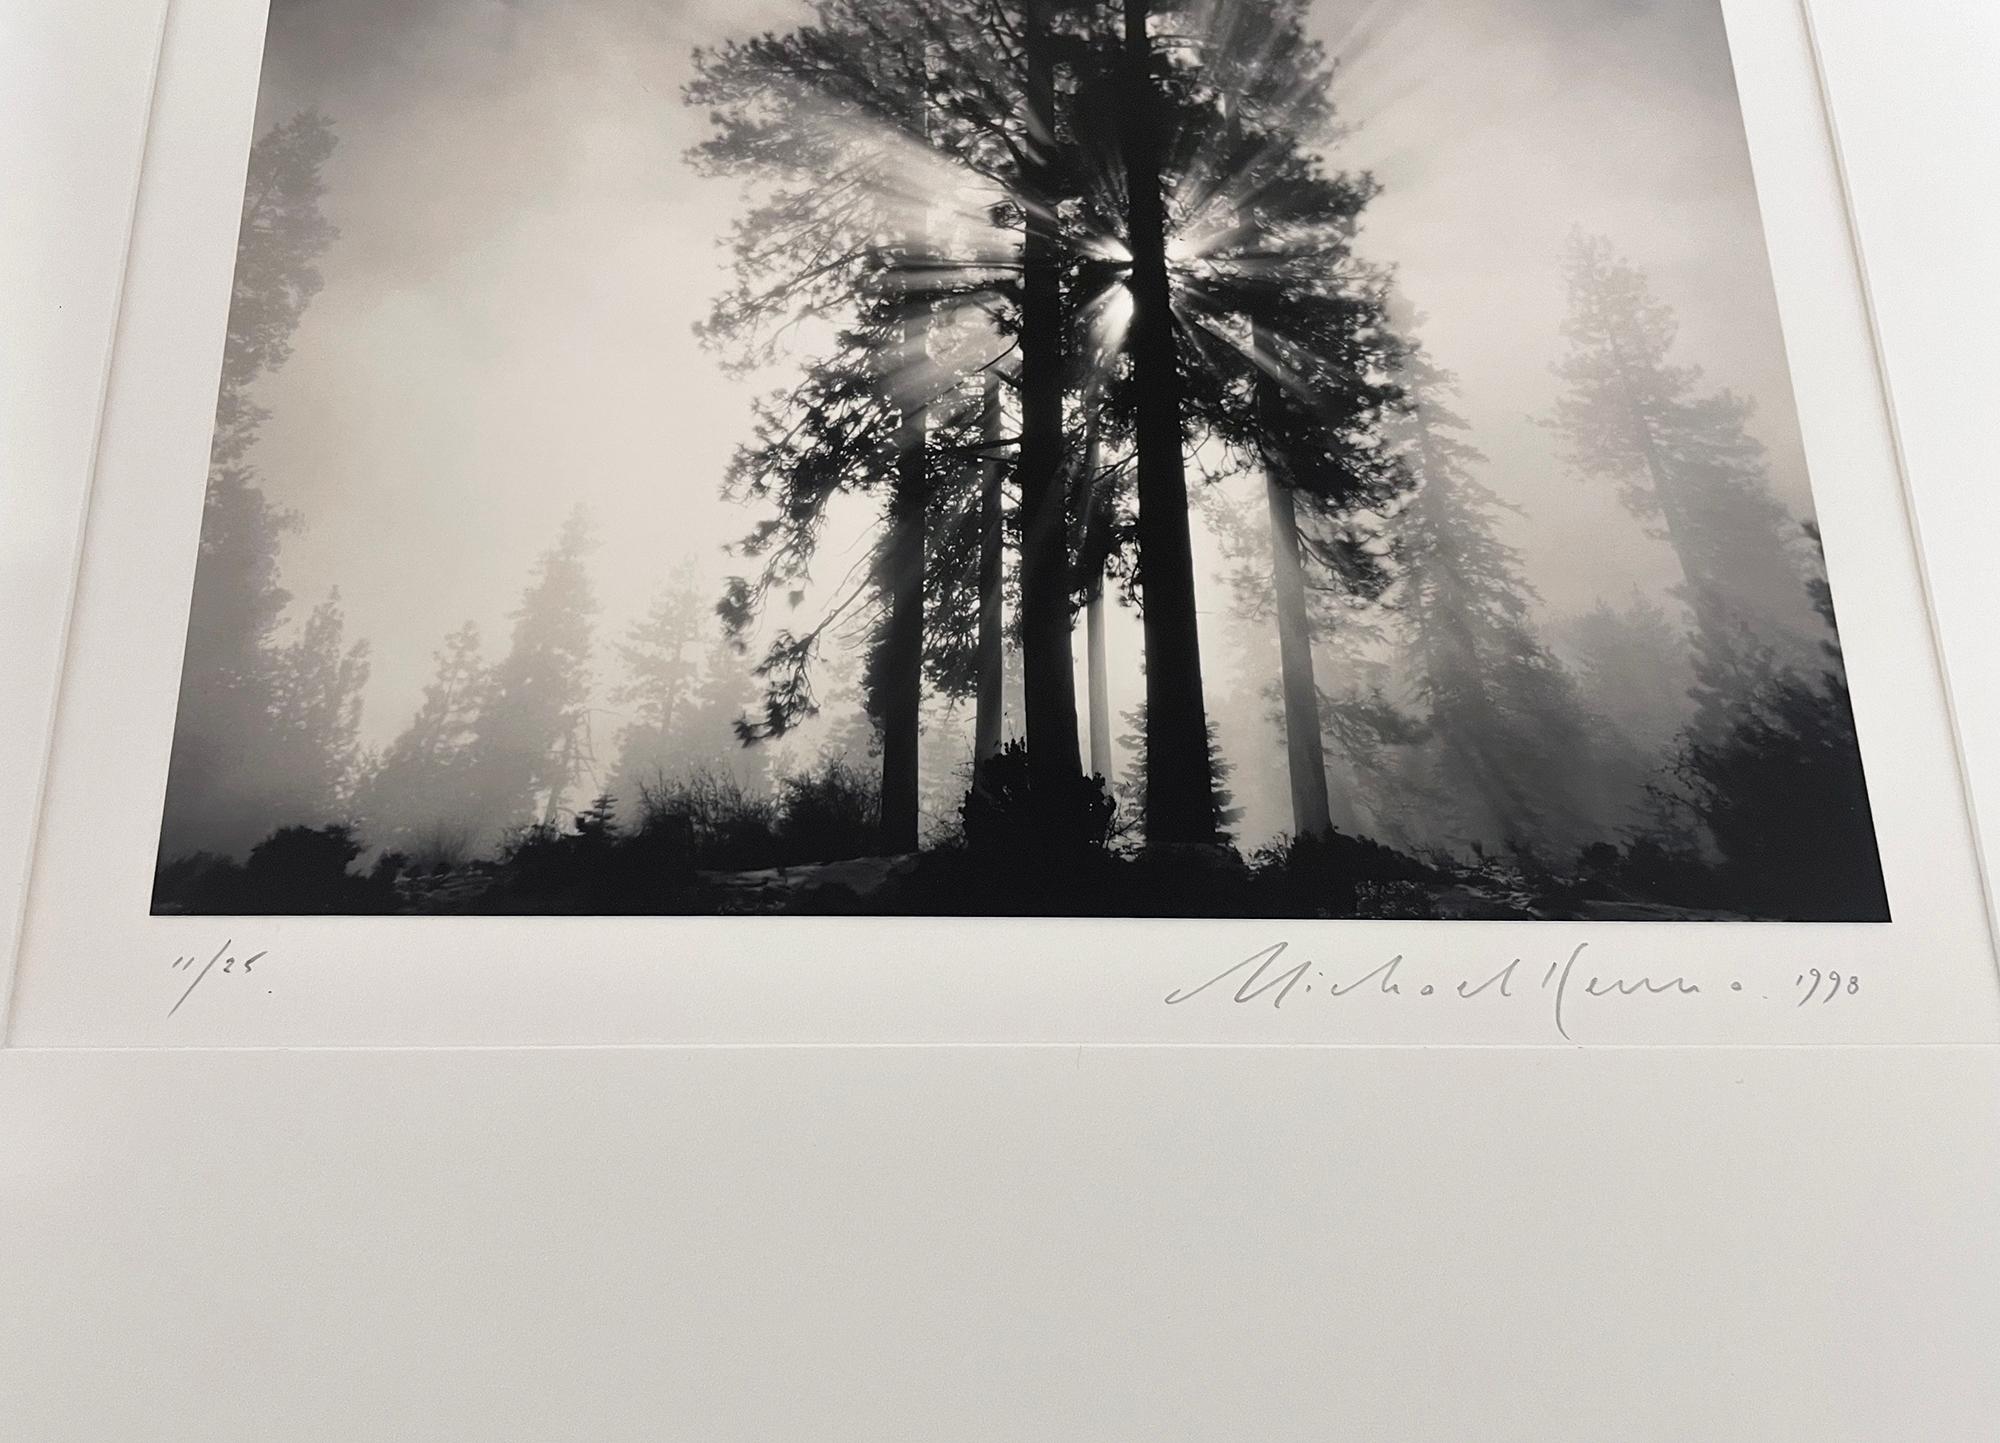 Avenue of Giants, Humbolt, California, USA by Michael Kenna, 1998 For Sale 3